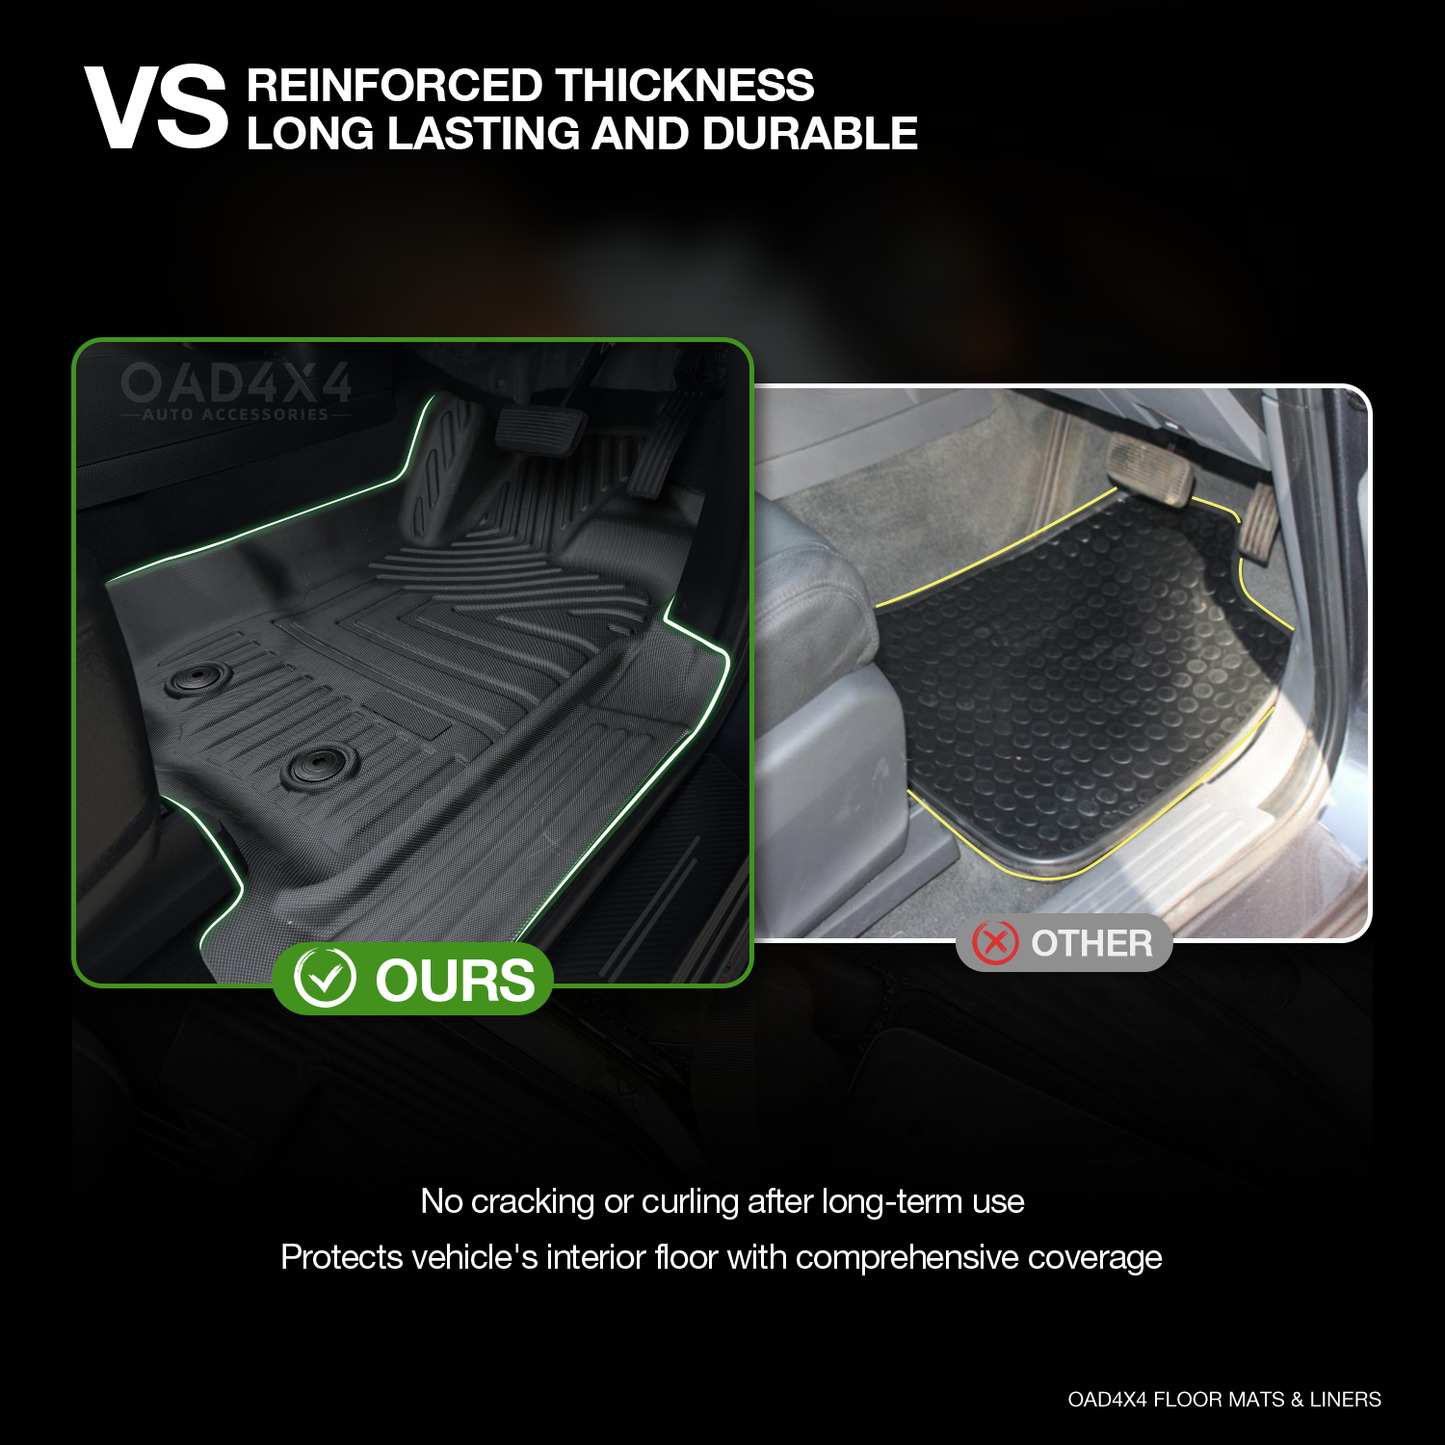 5D TPE Floor Mats & Black Door Sill Protector for Ford Everest UA/UA II 2015-2022 Tailored Door Sill Covered Car Floor Mat Liner + Stainless Steel Scuff Plates Protector